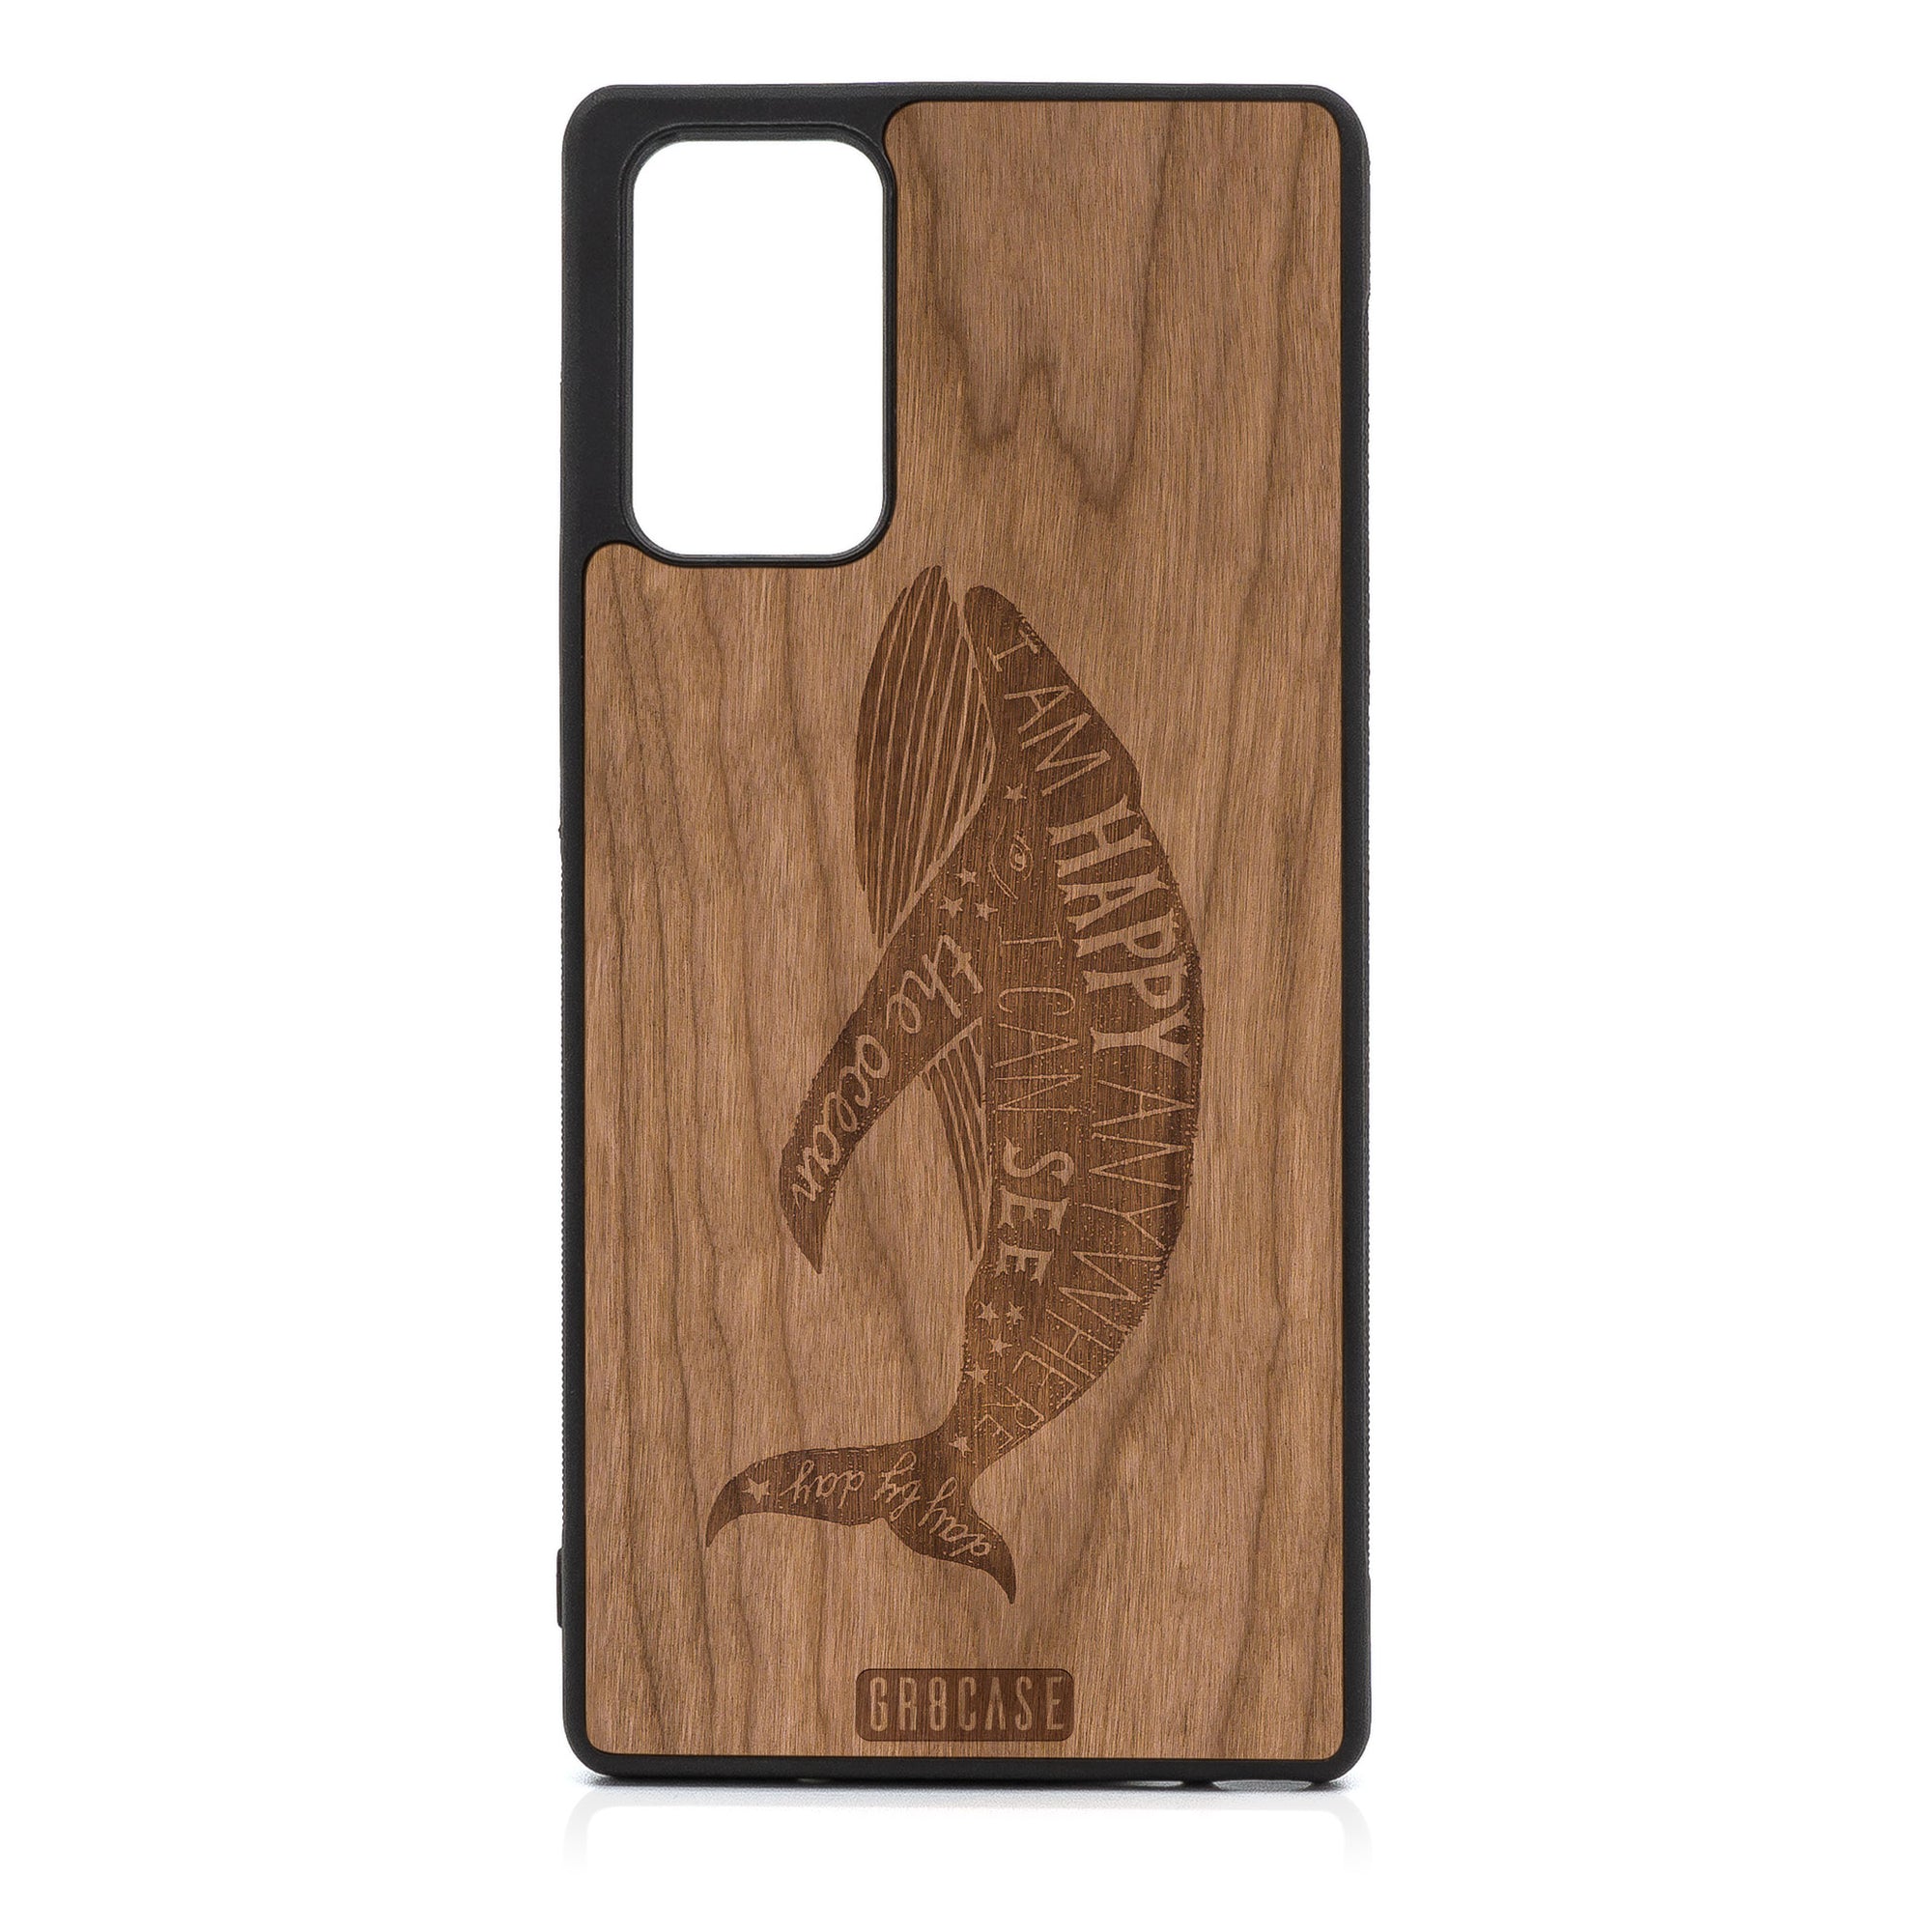 I'm Happy Anywhere I Can See The Ocean (Whale) Design Wood Case For Samsung Galaxy Note 20